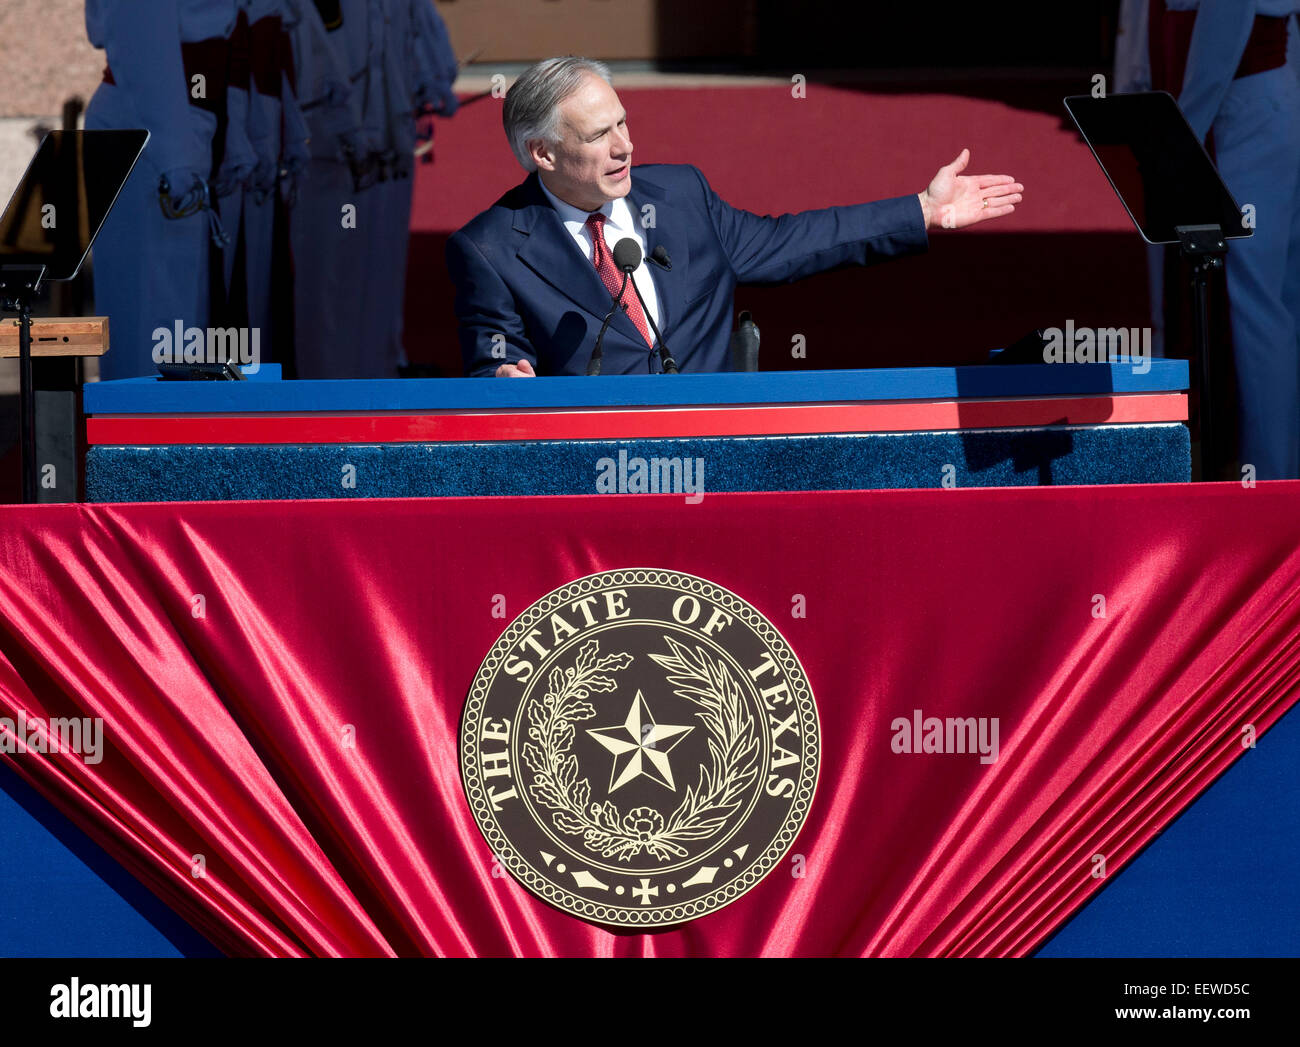 New Texas Governor Greg Abbott gestures during his inaugural speech at